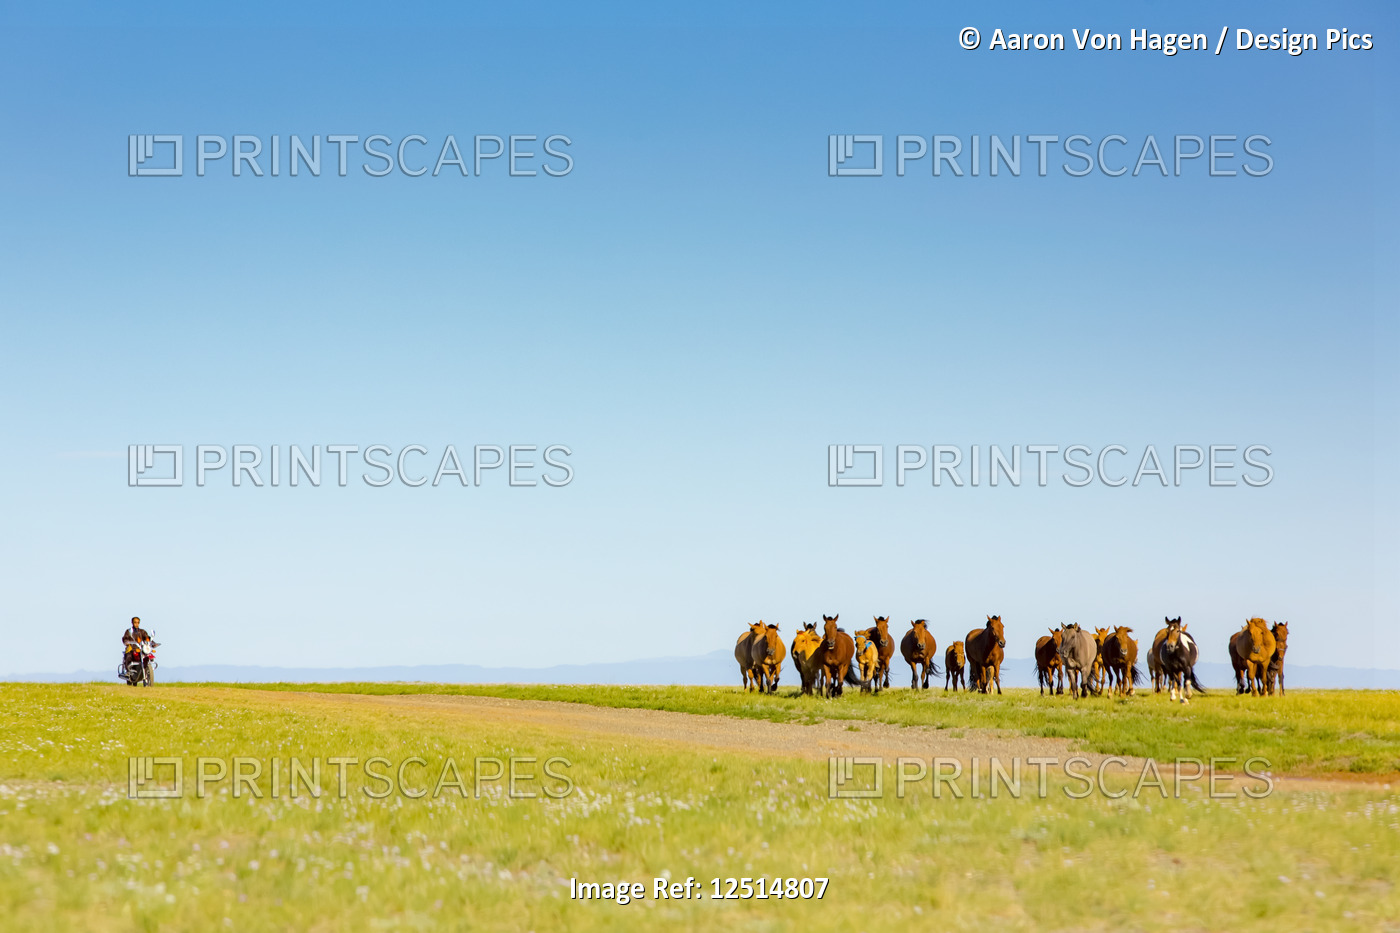 A herd of horses on a grass field in the Gobi desert with a motorcyclist ...